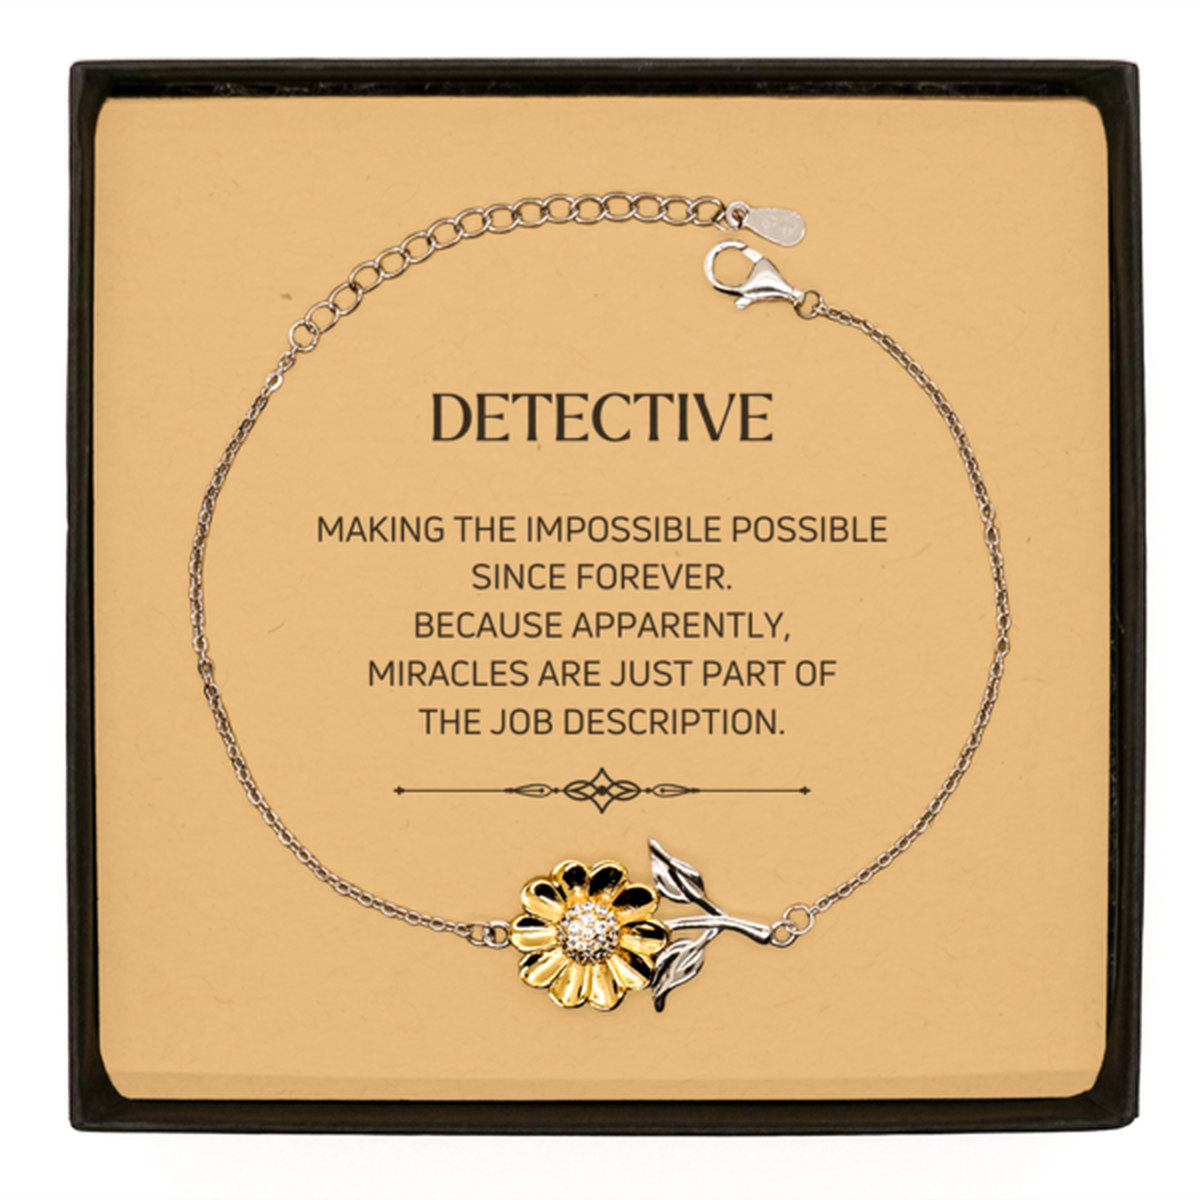 Funny Detective Gifts, Miracles are just part of the job description, Inspirational Birthday Sunflower Bracelet For Detective, Men, Women, Coworkers, Friends, Boss